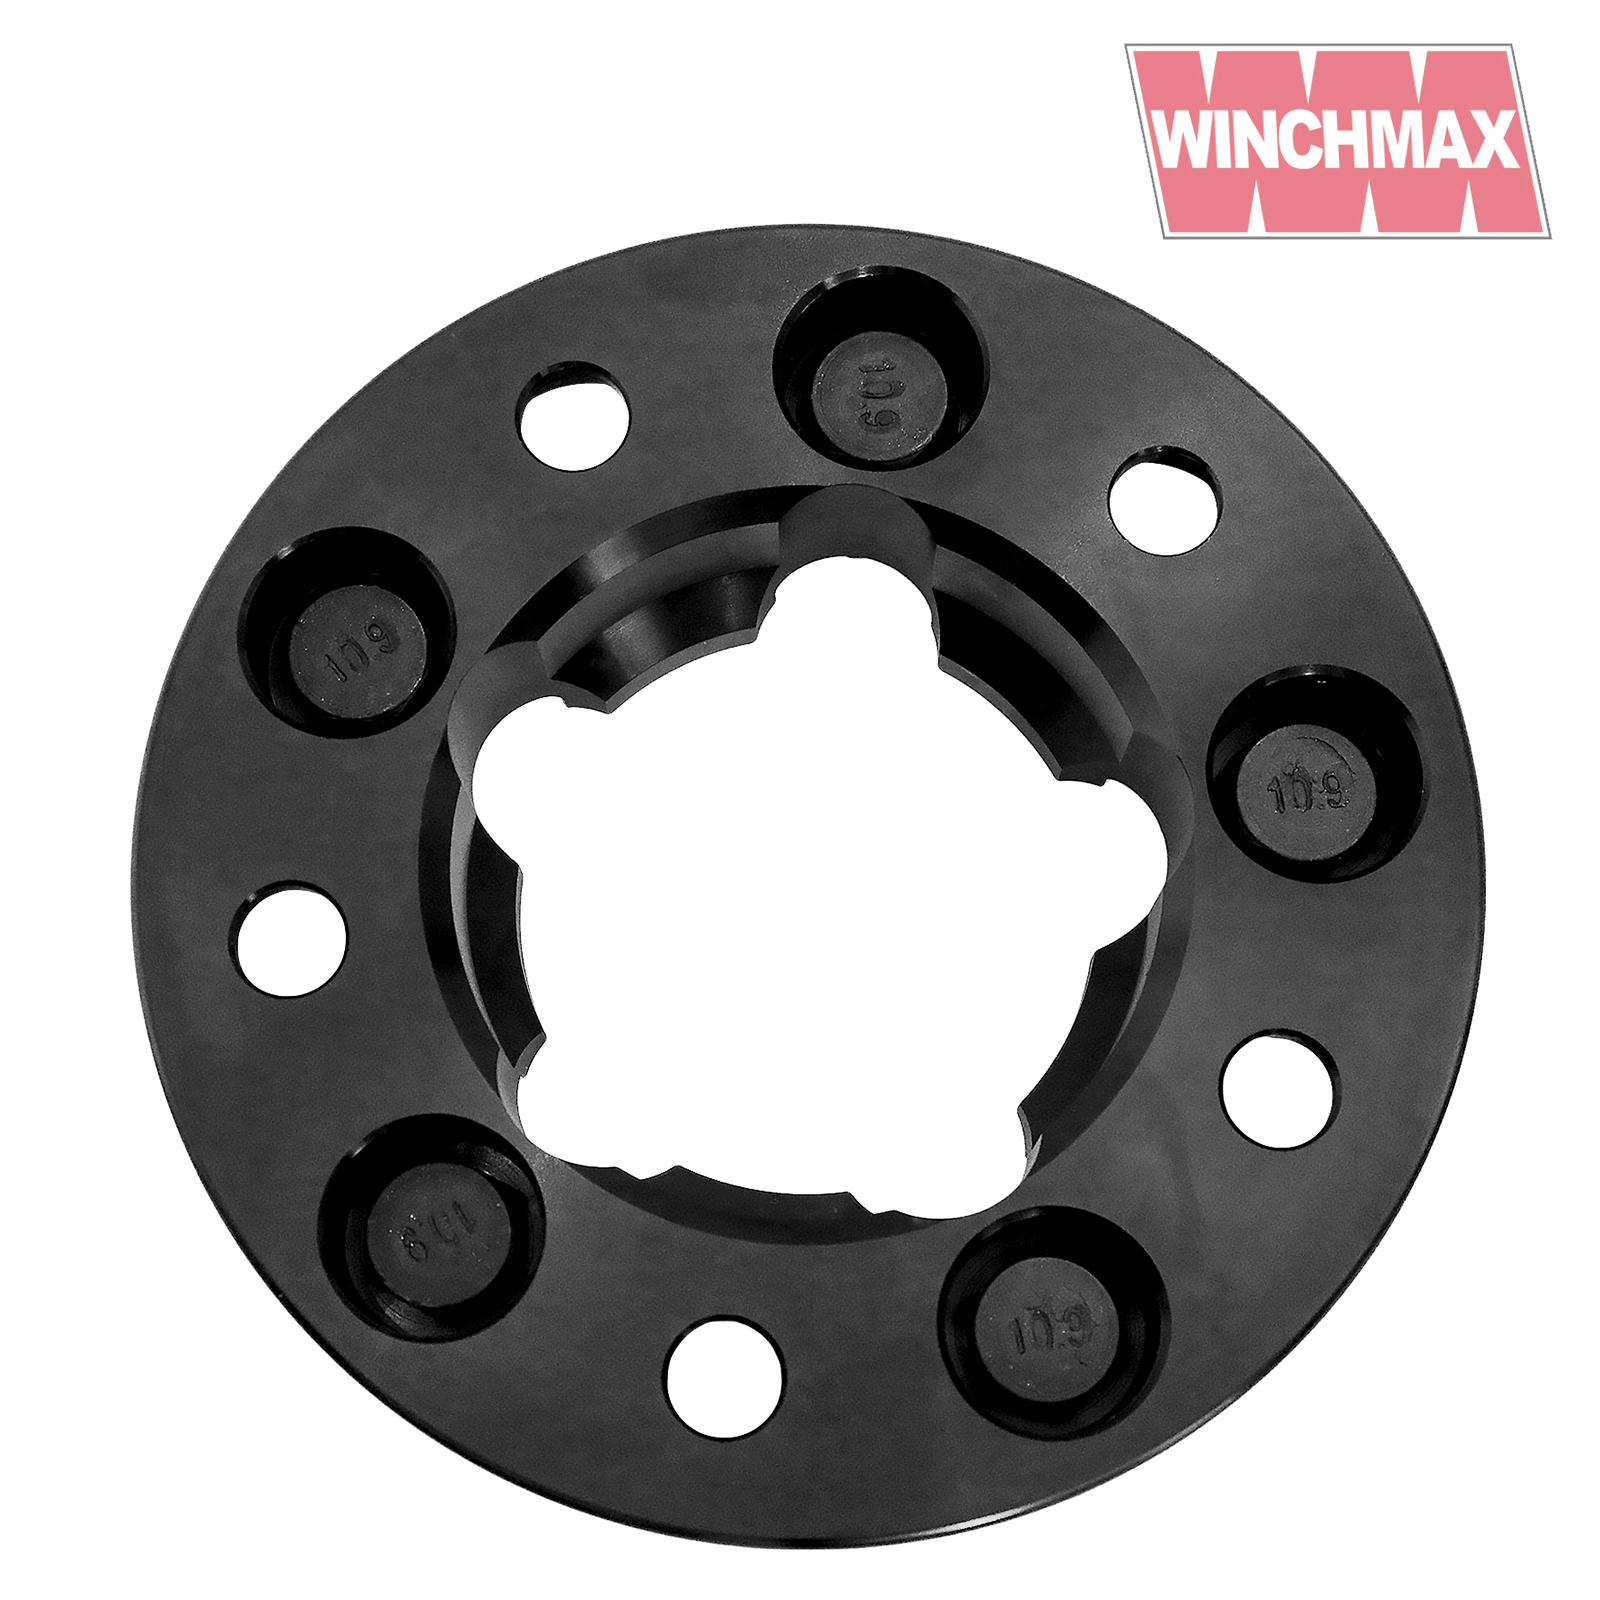 WINCHMAX 38mm Wheel Spacer